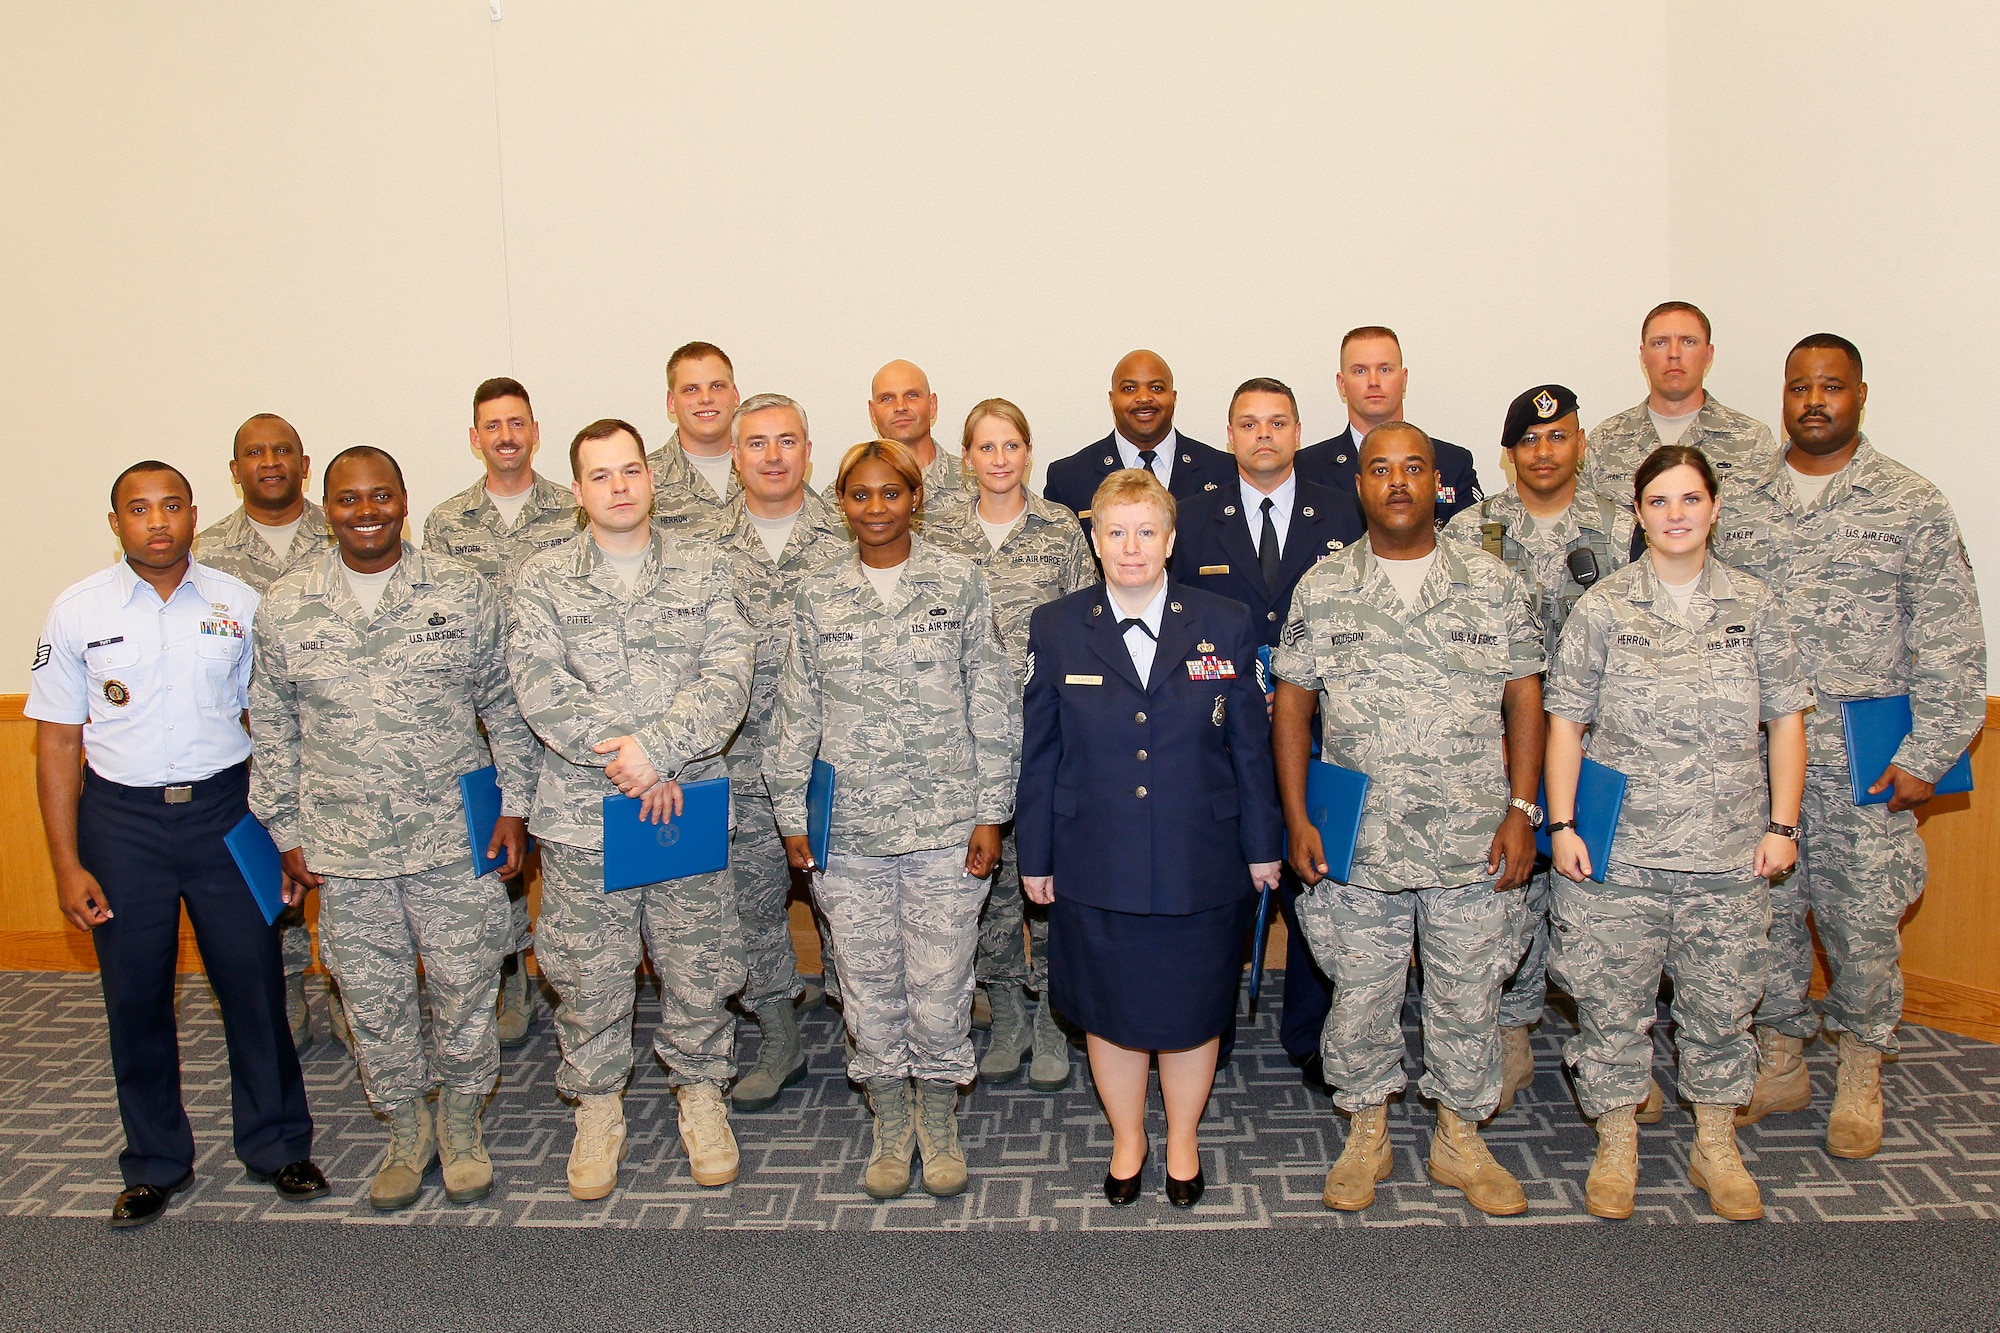 Airmen from the 127th Wing, Michigan Air National Guard, who graduated from the Community College of the Air Firce gather for a group photo on May 22, 2011, at Selfridge Air National Guard Base, Mich. The CCAF allows Airmen to combine military and civilian education to work toward an associate degree in their military career field. (U.S. Air Force photo by MSgt. Terry Atwell) (Released)